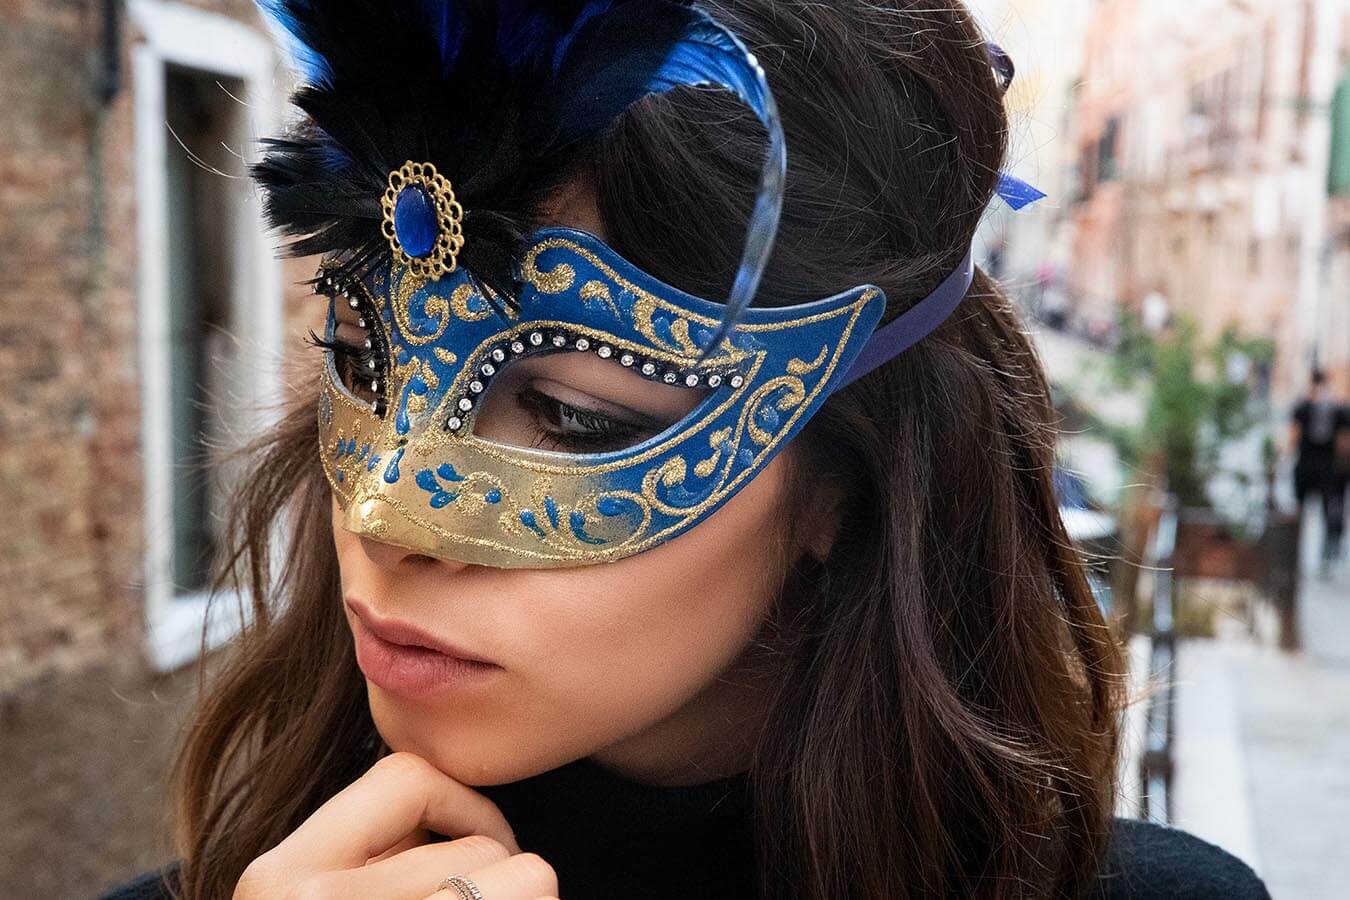 Colombina Feathered Mask | Venetian Feathered Masks in Venice